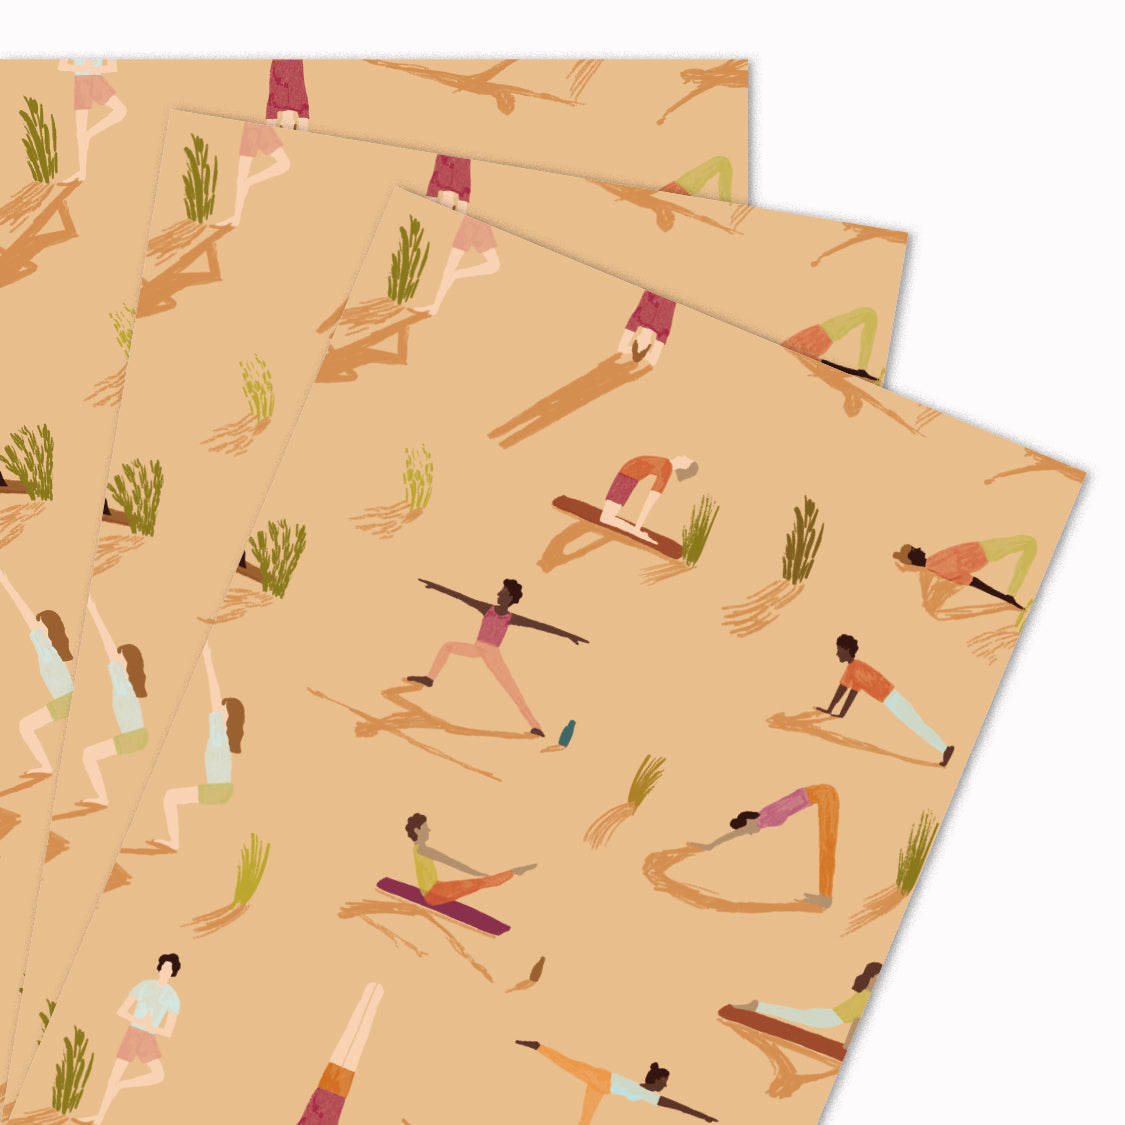 Pack of 3 'Yoga Retreat' gift wrap sheets illustrated by Katy Welsh for USTUDIO Design. Perfect for your yoga loving friend or loved one featuring various yoga poses with a neutral calming colour palette.